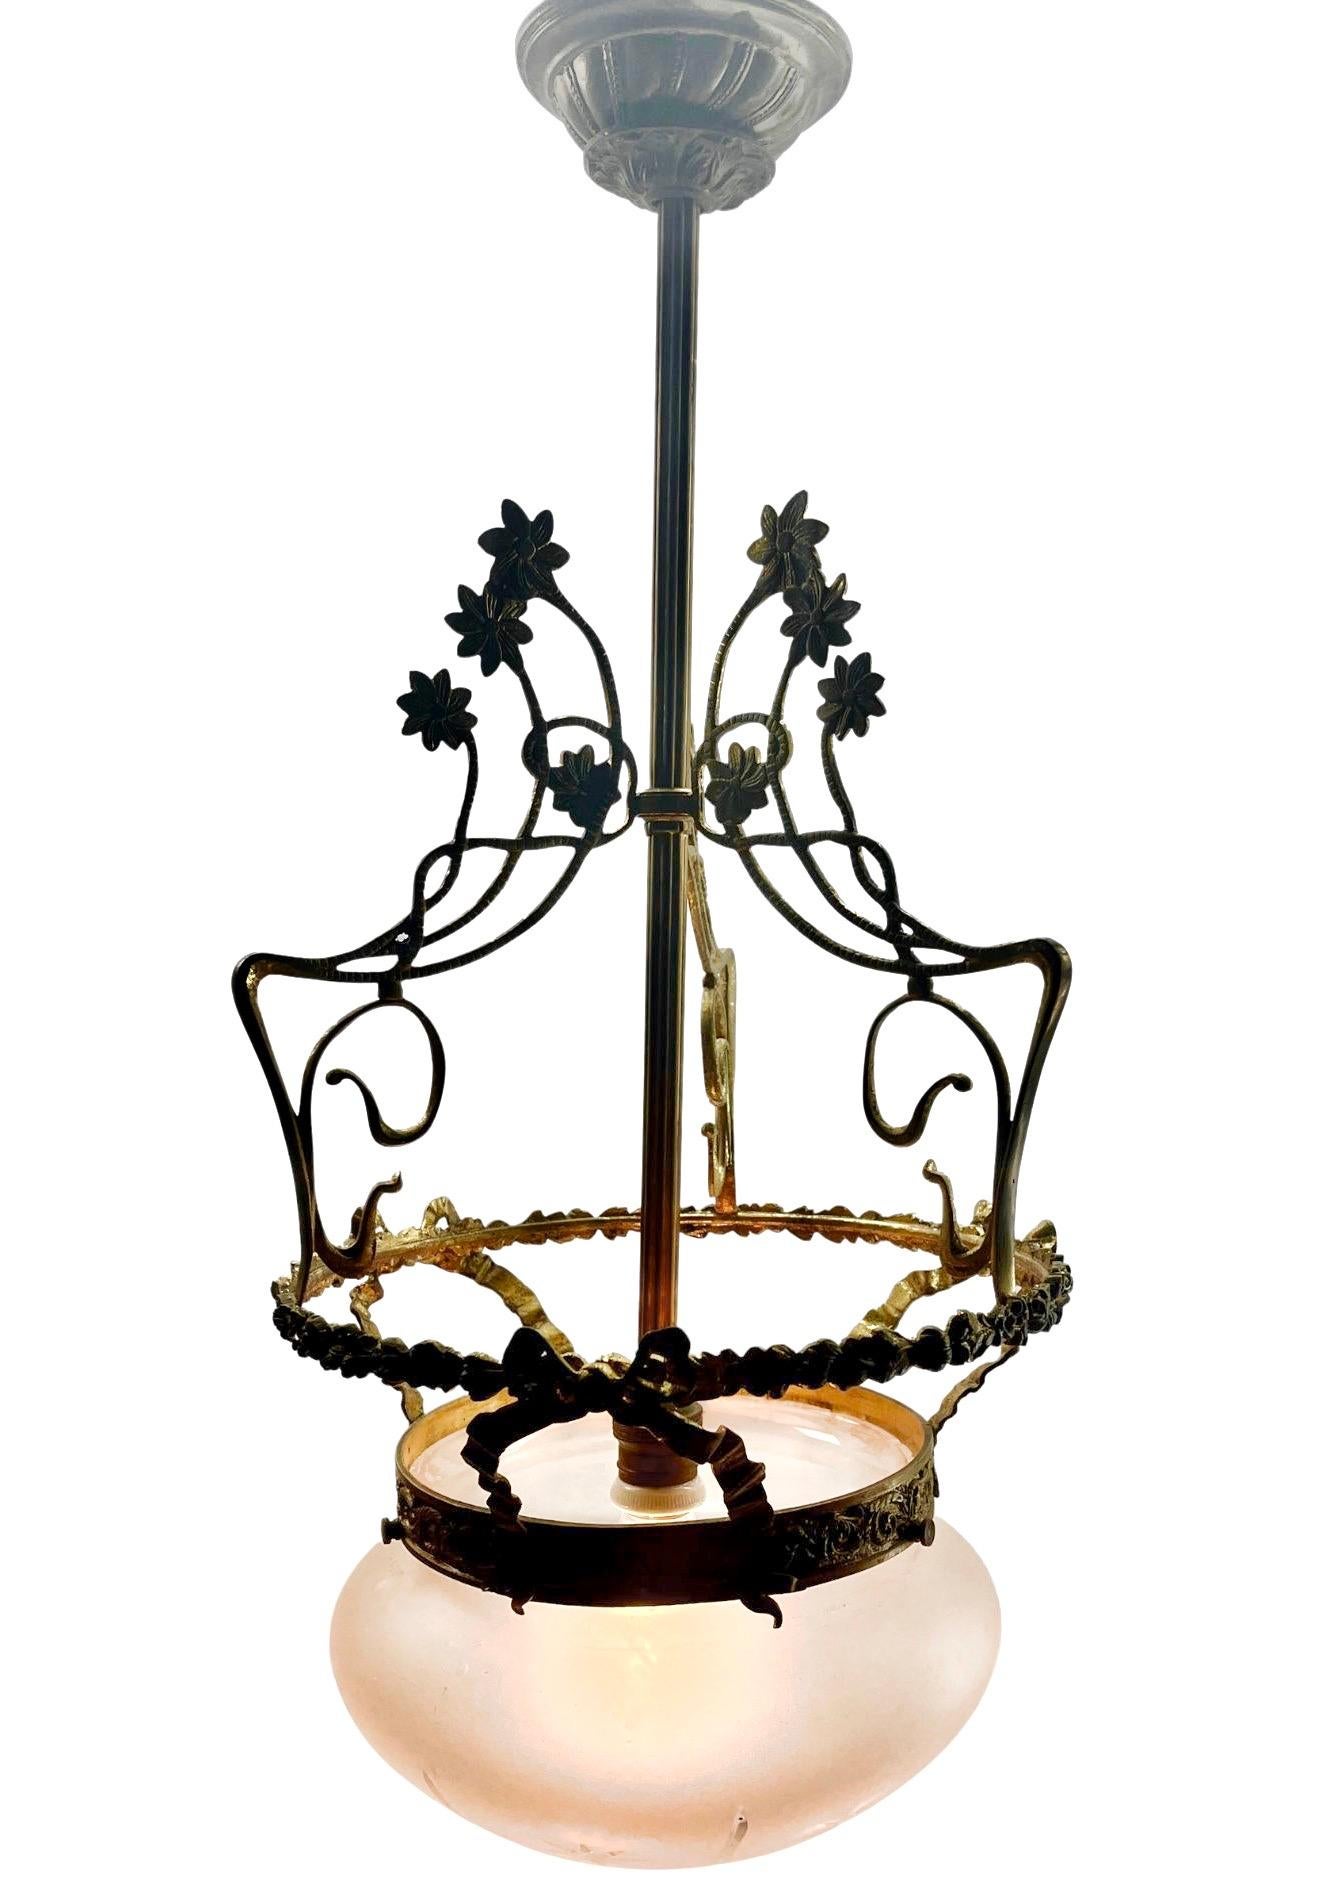 Mid-20th Century Art Nouveau Solid Brass Chandelier With Floral Decorations  1930s For Sale